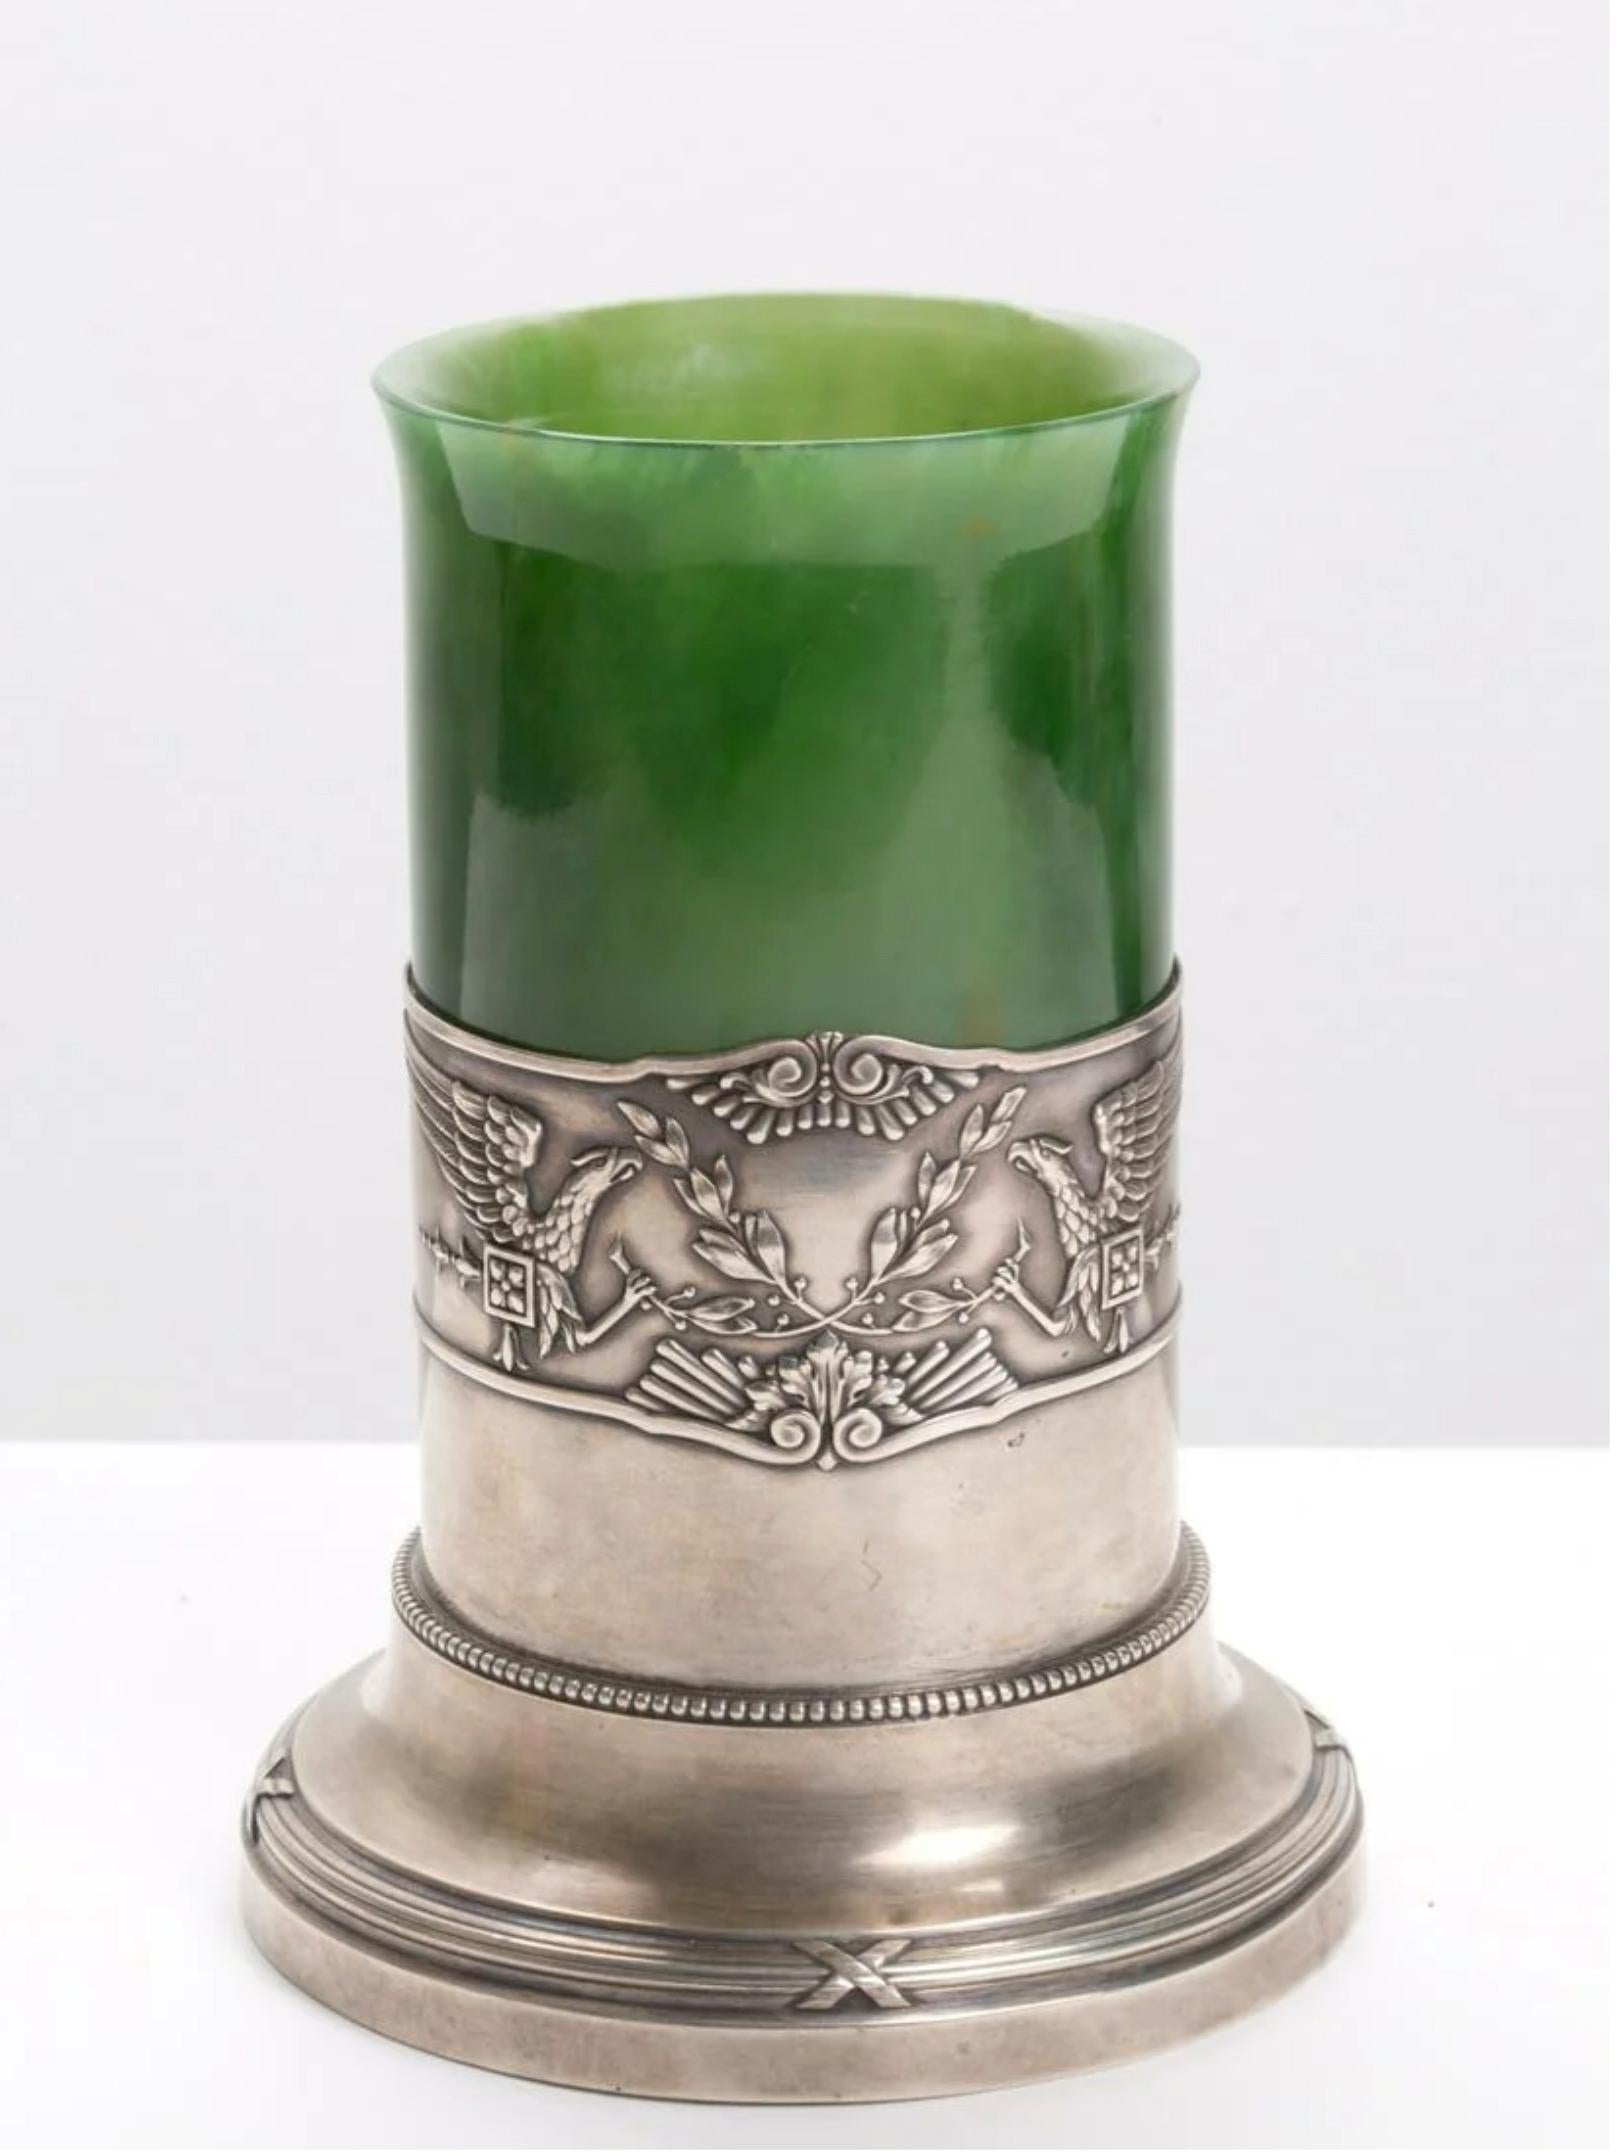 A rare and magnificent piece by Fabergè, Moscow in the early 1900s. Excavated green jade vase, inserted in a finely embossed silver base. Under the vase we can see his Punch FABERGE', Russia on the bottom. 
Early 20th century. 
A unique piece or